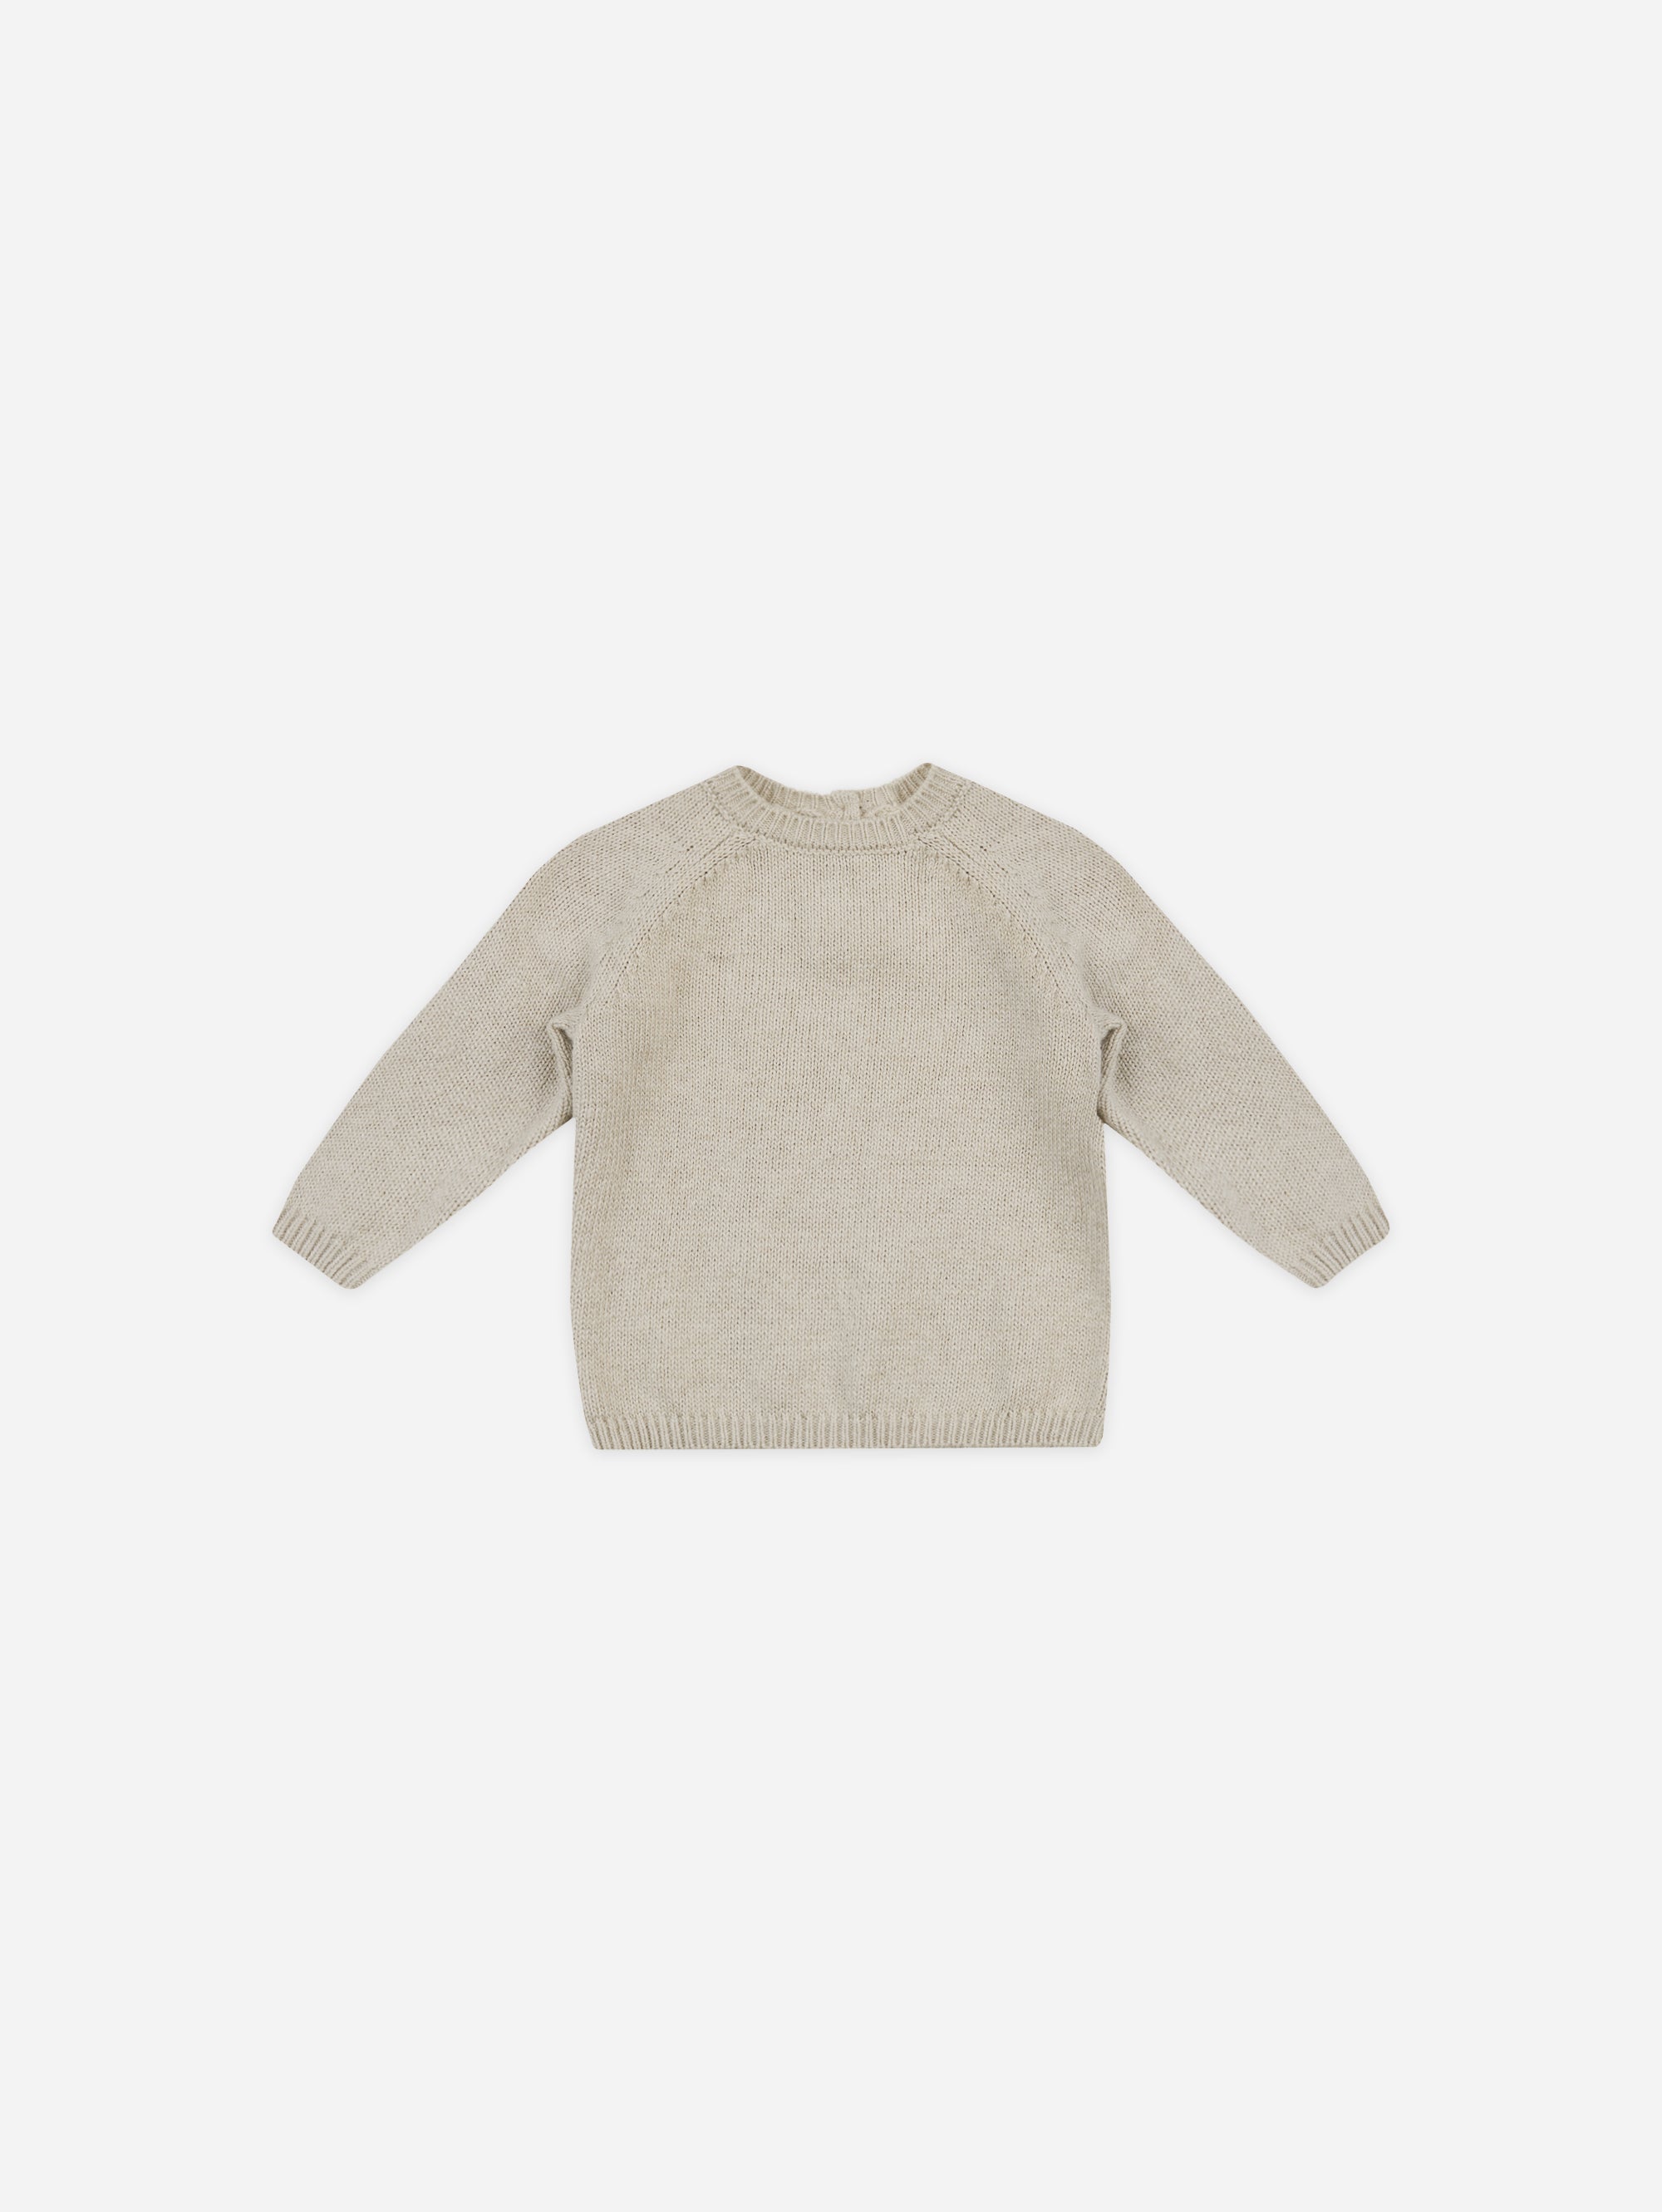 Knit Sweater || Heathered Ash - Rylee + Cru | Kids Clothes | Trendy Baby Clothes | Modern Infant Outfits |